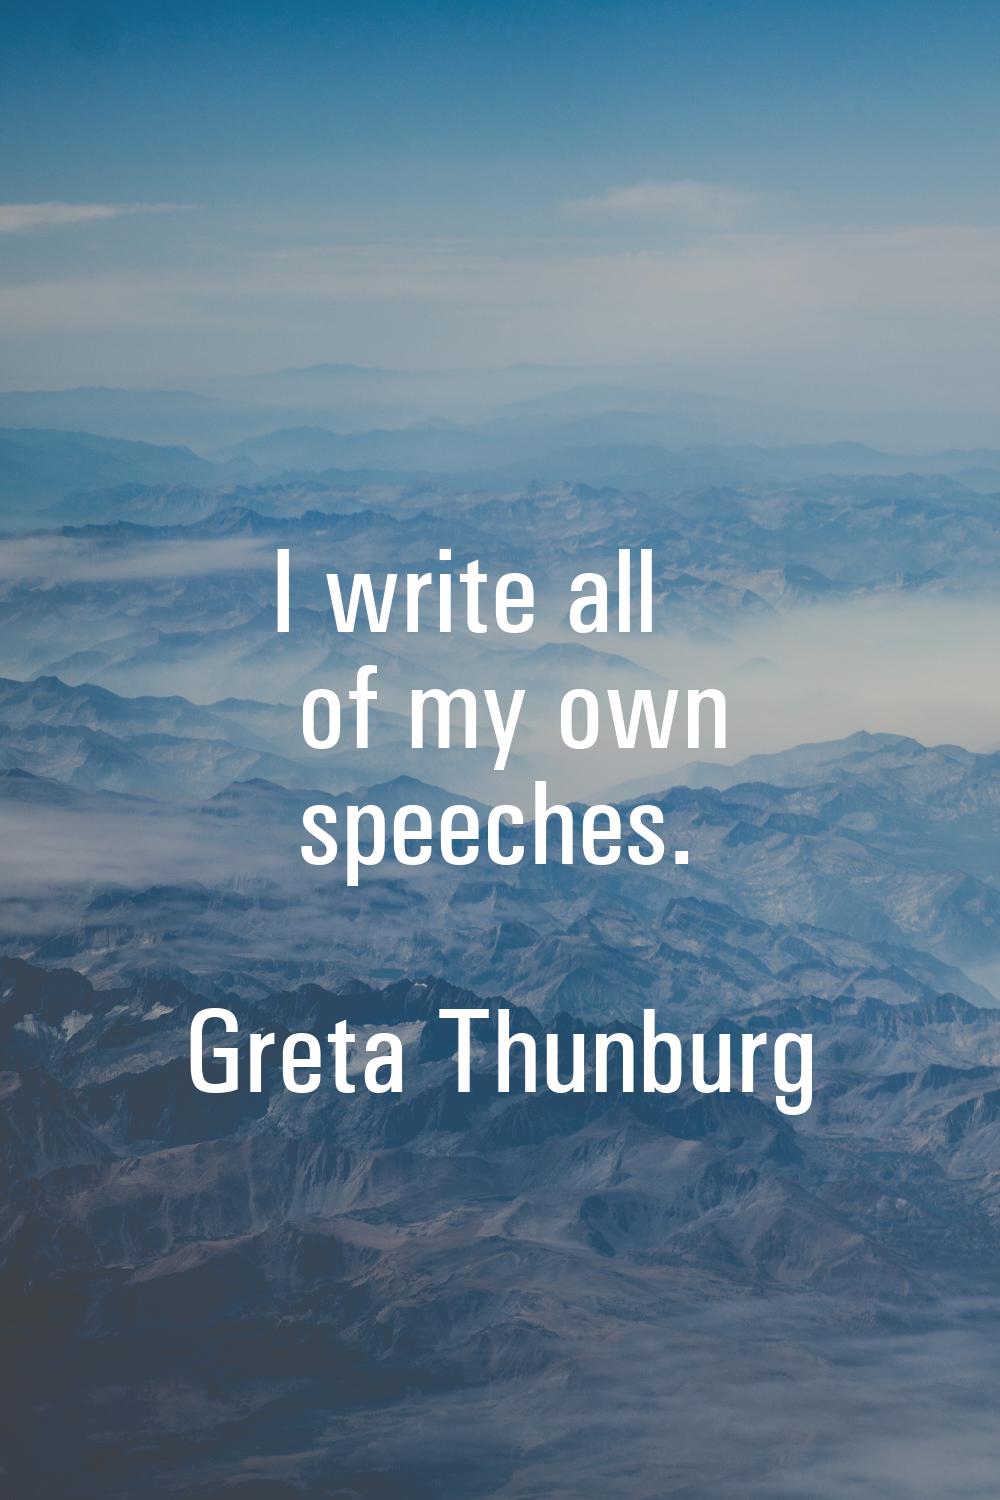 I write all of my own speeches.